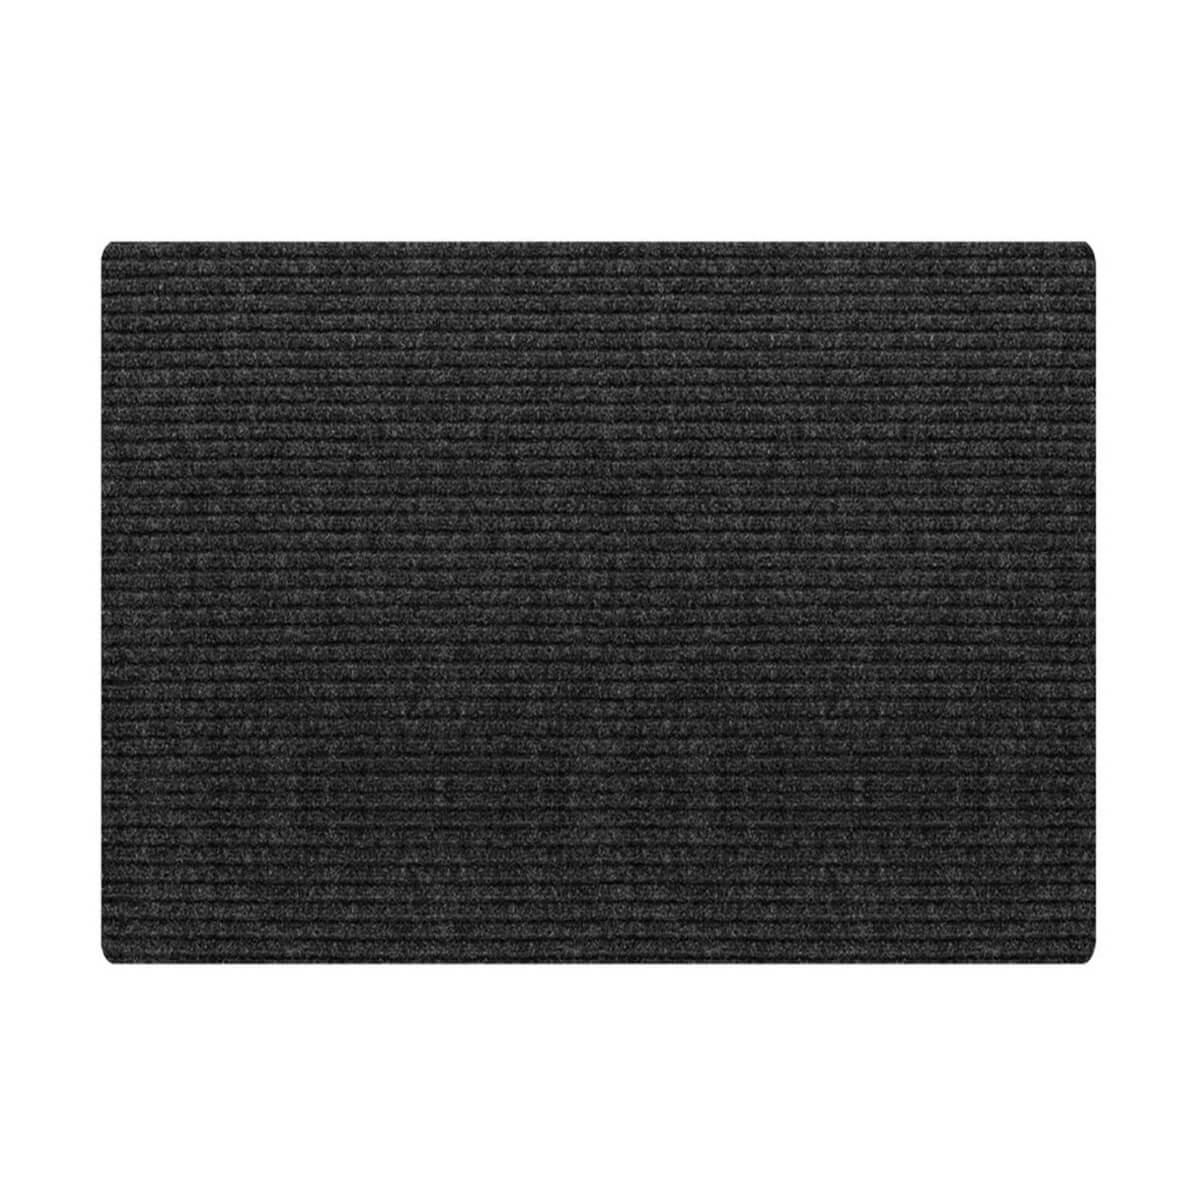 Concord Mat - Charcoal - 4-ft x 6-ft